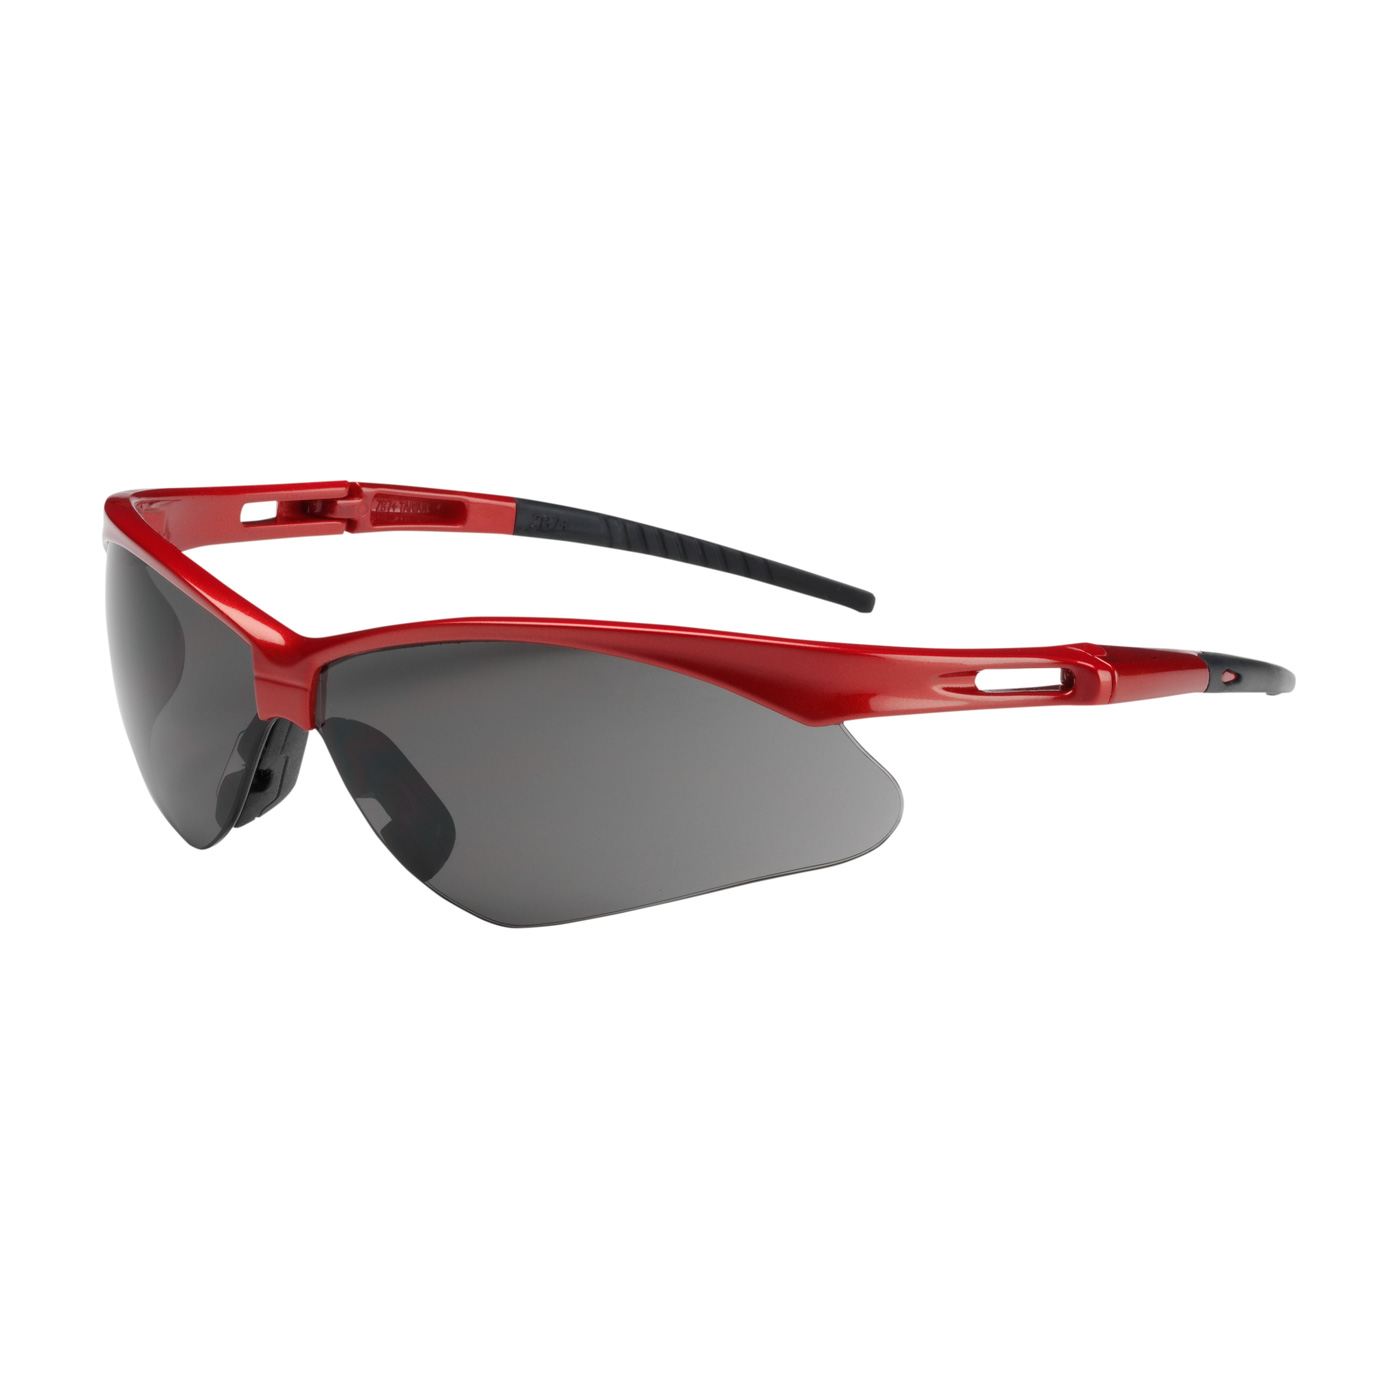 PIP 250-AN-10117 Anser Semi-Rimless Safety Glasses with Red Frame, Gray Lens and Anti-Scratch Coating PID-250 AN 10117